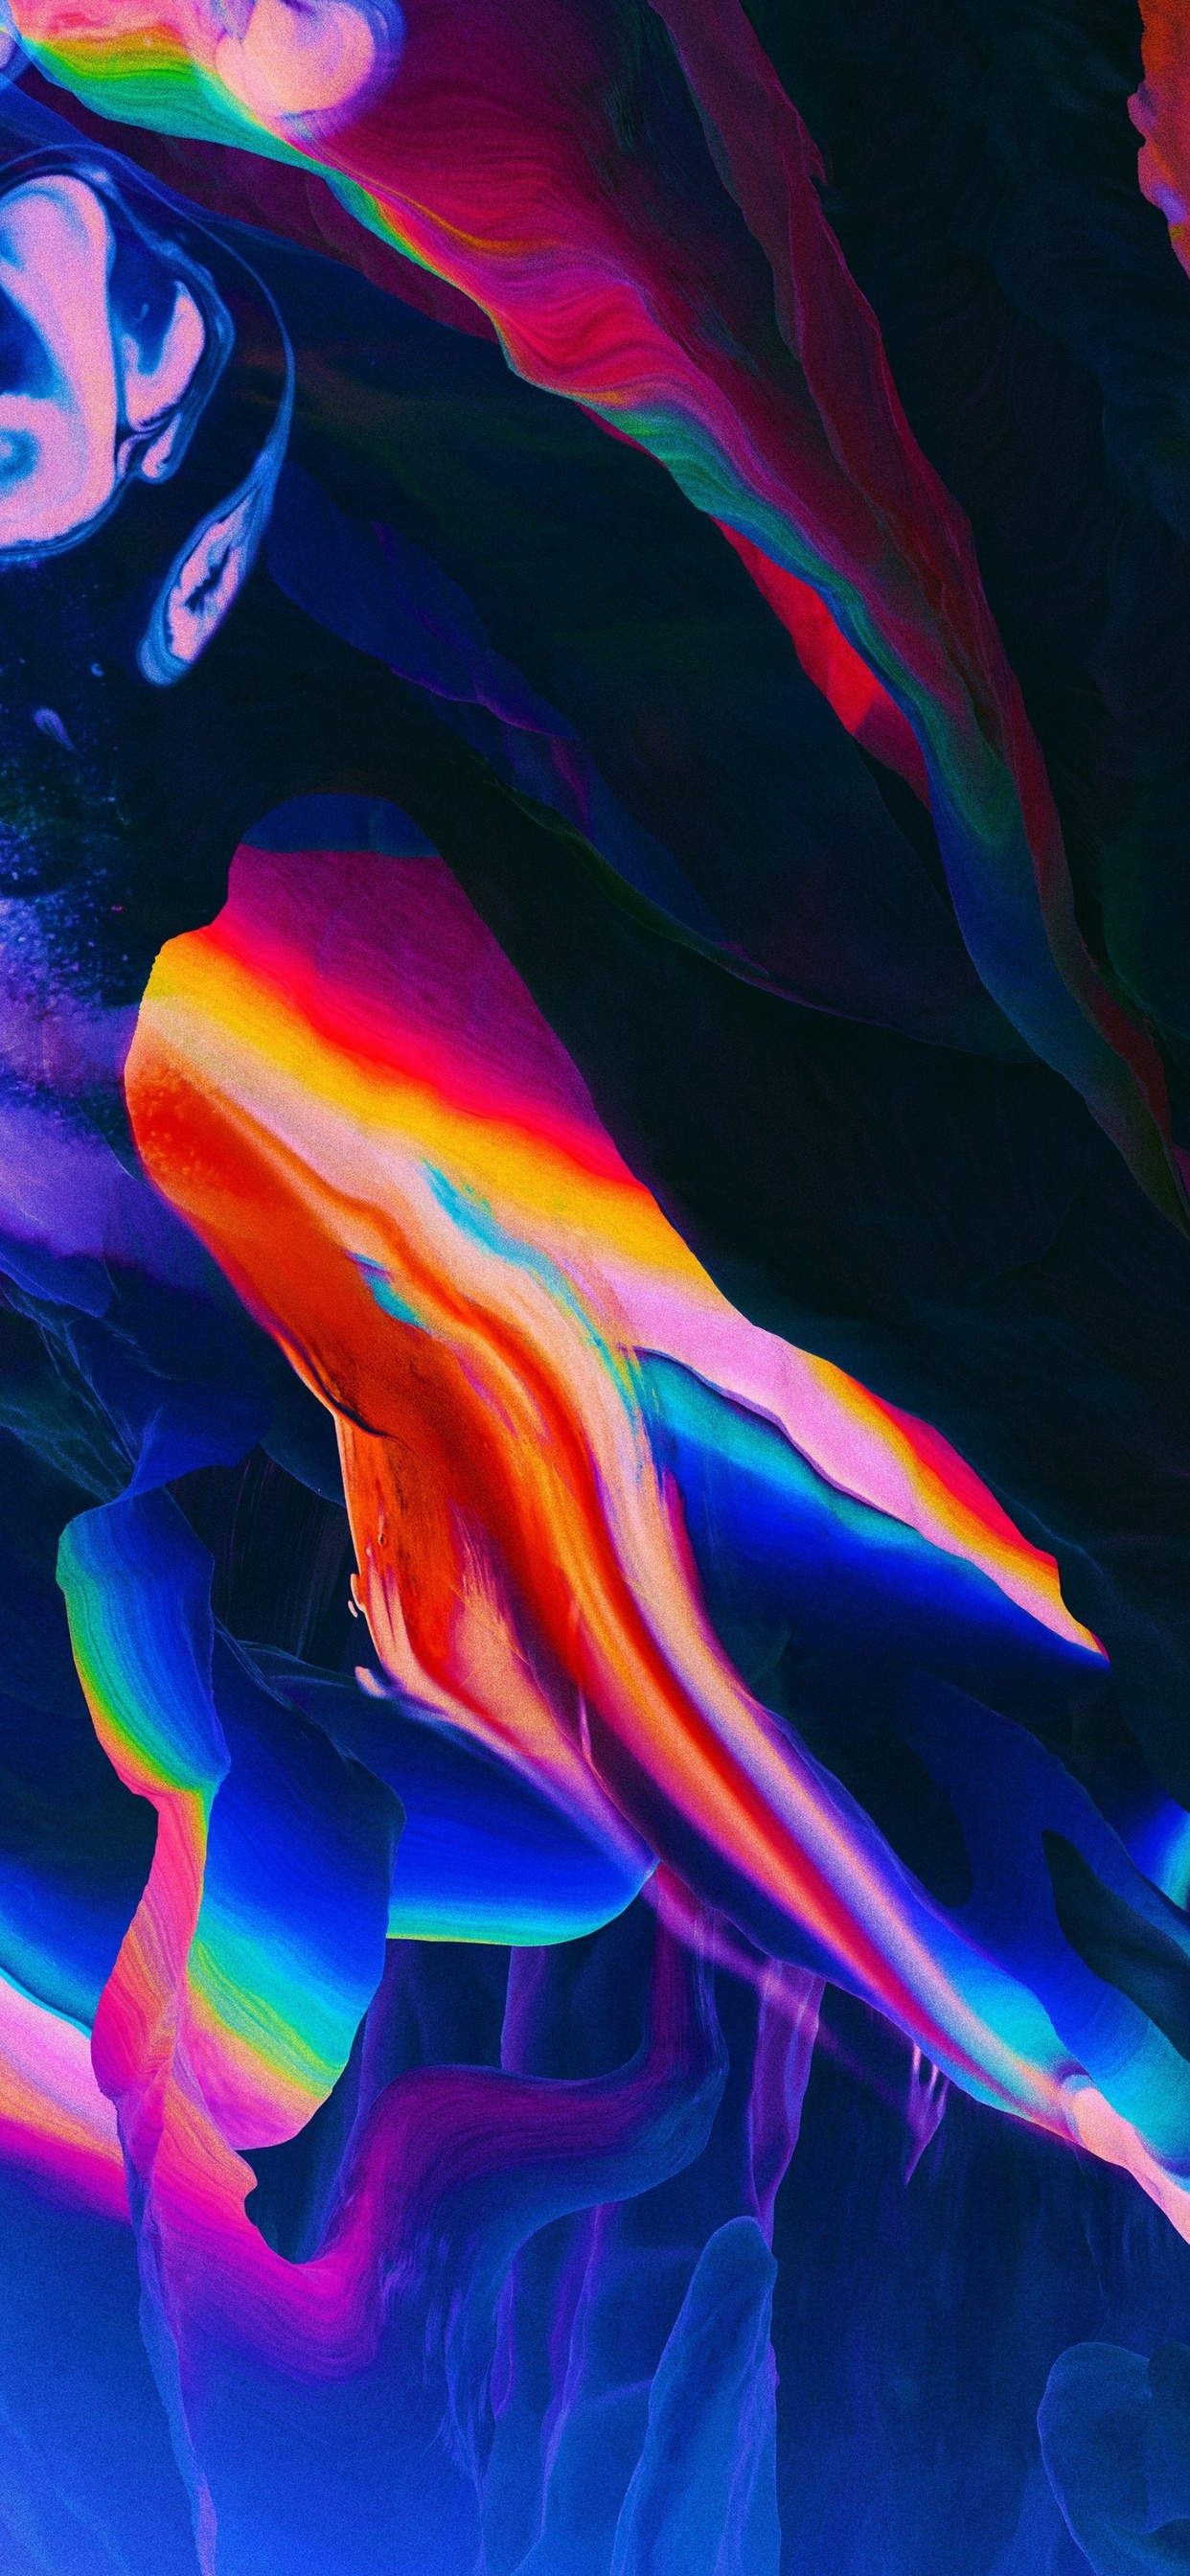 A woman with rainbow colors on her body - Abstract